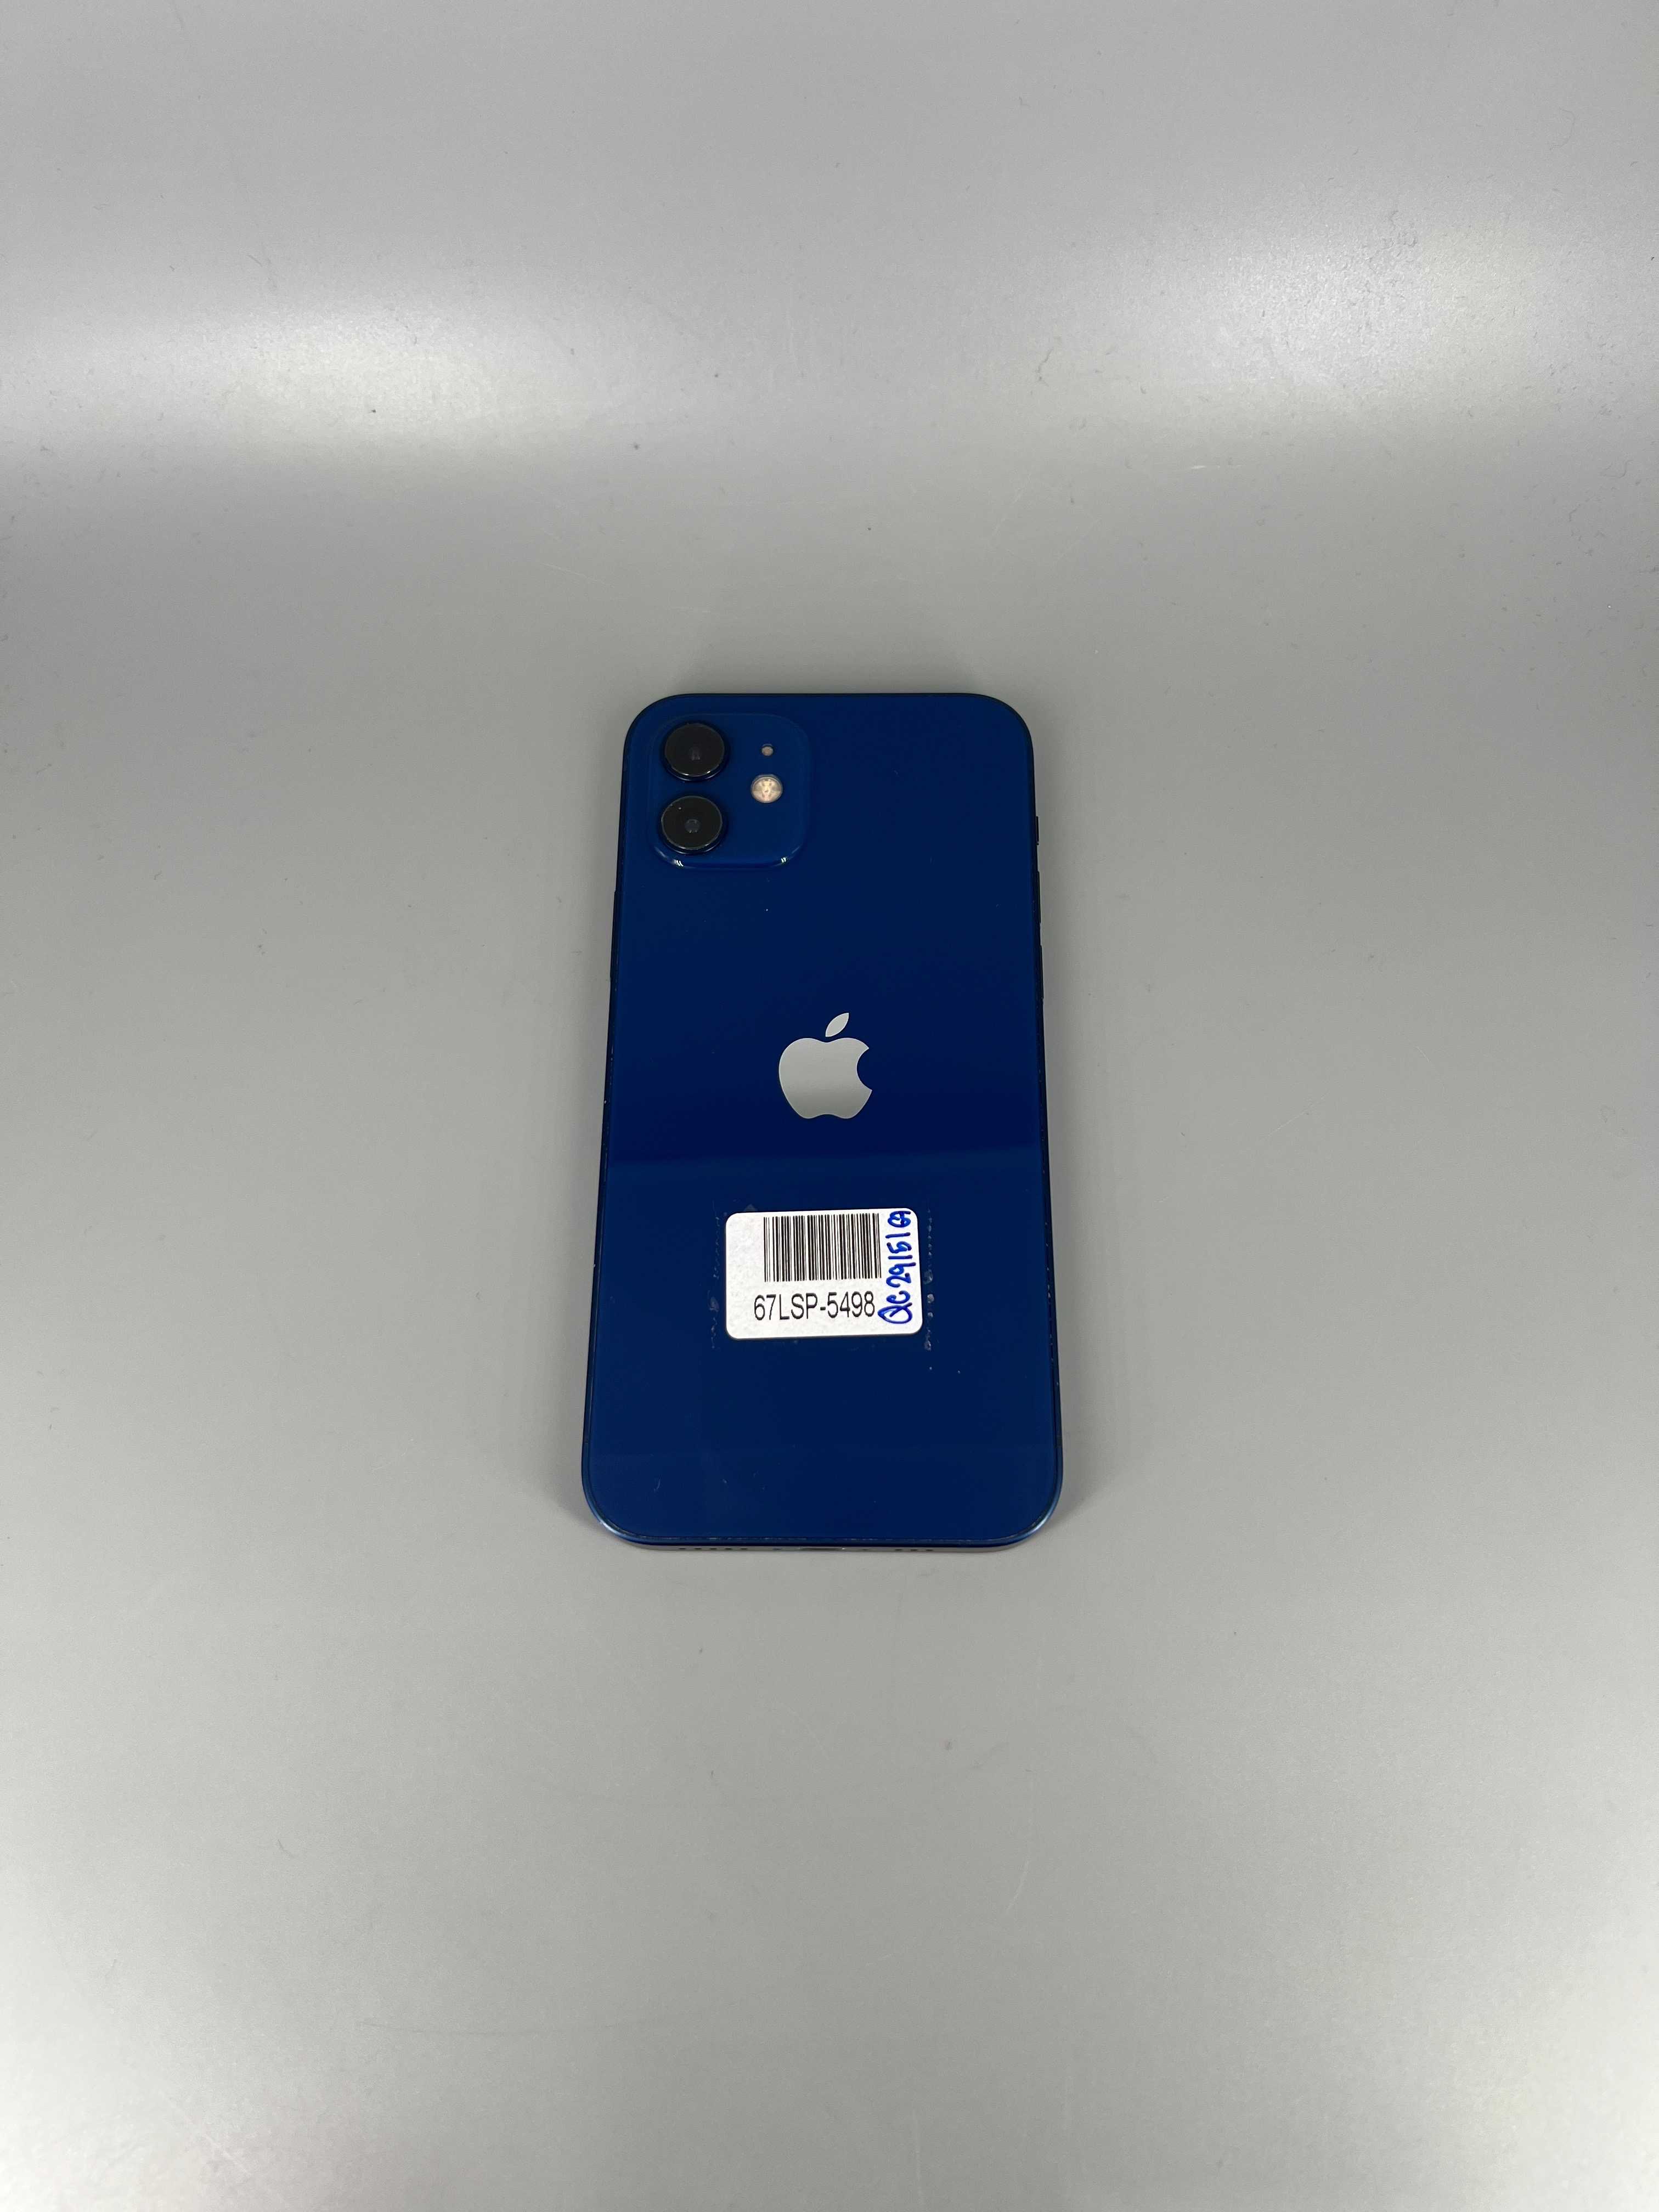 Used iPhone 12 128GB Blue 67LSP-5498